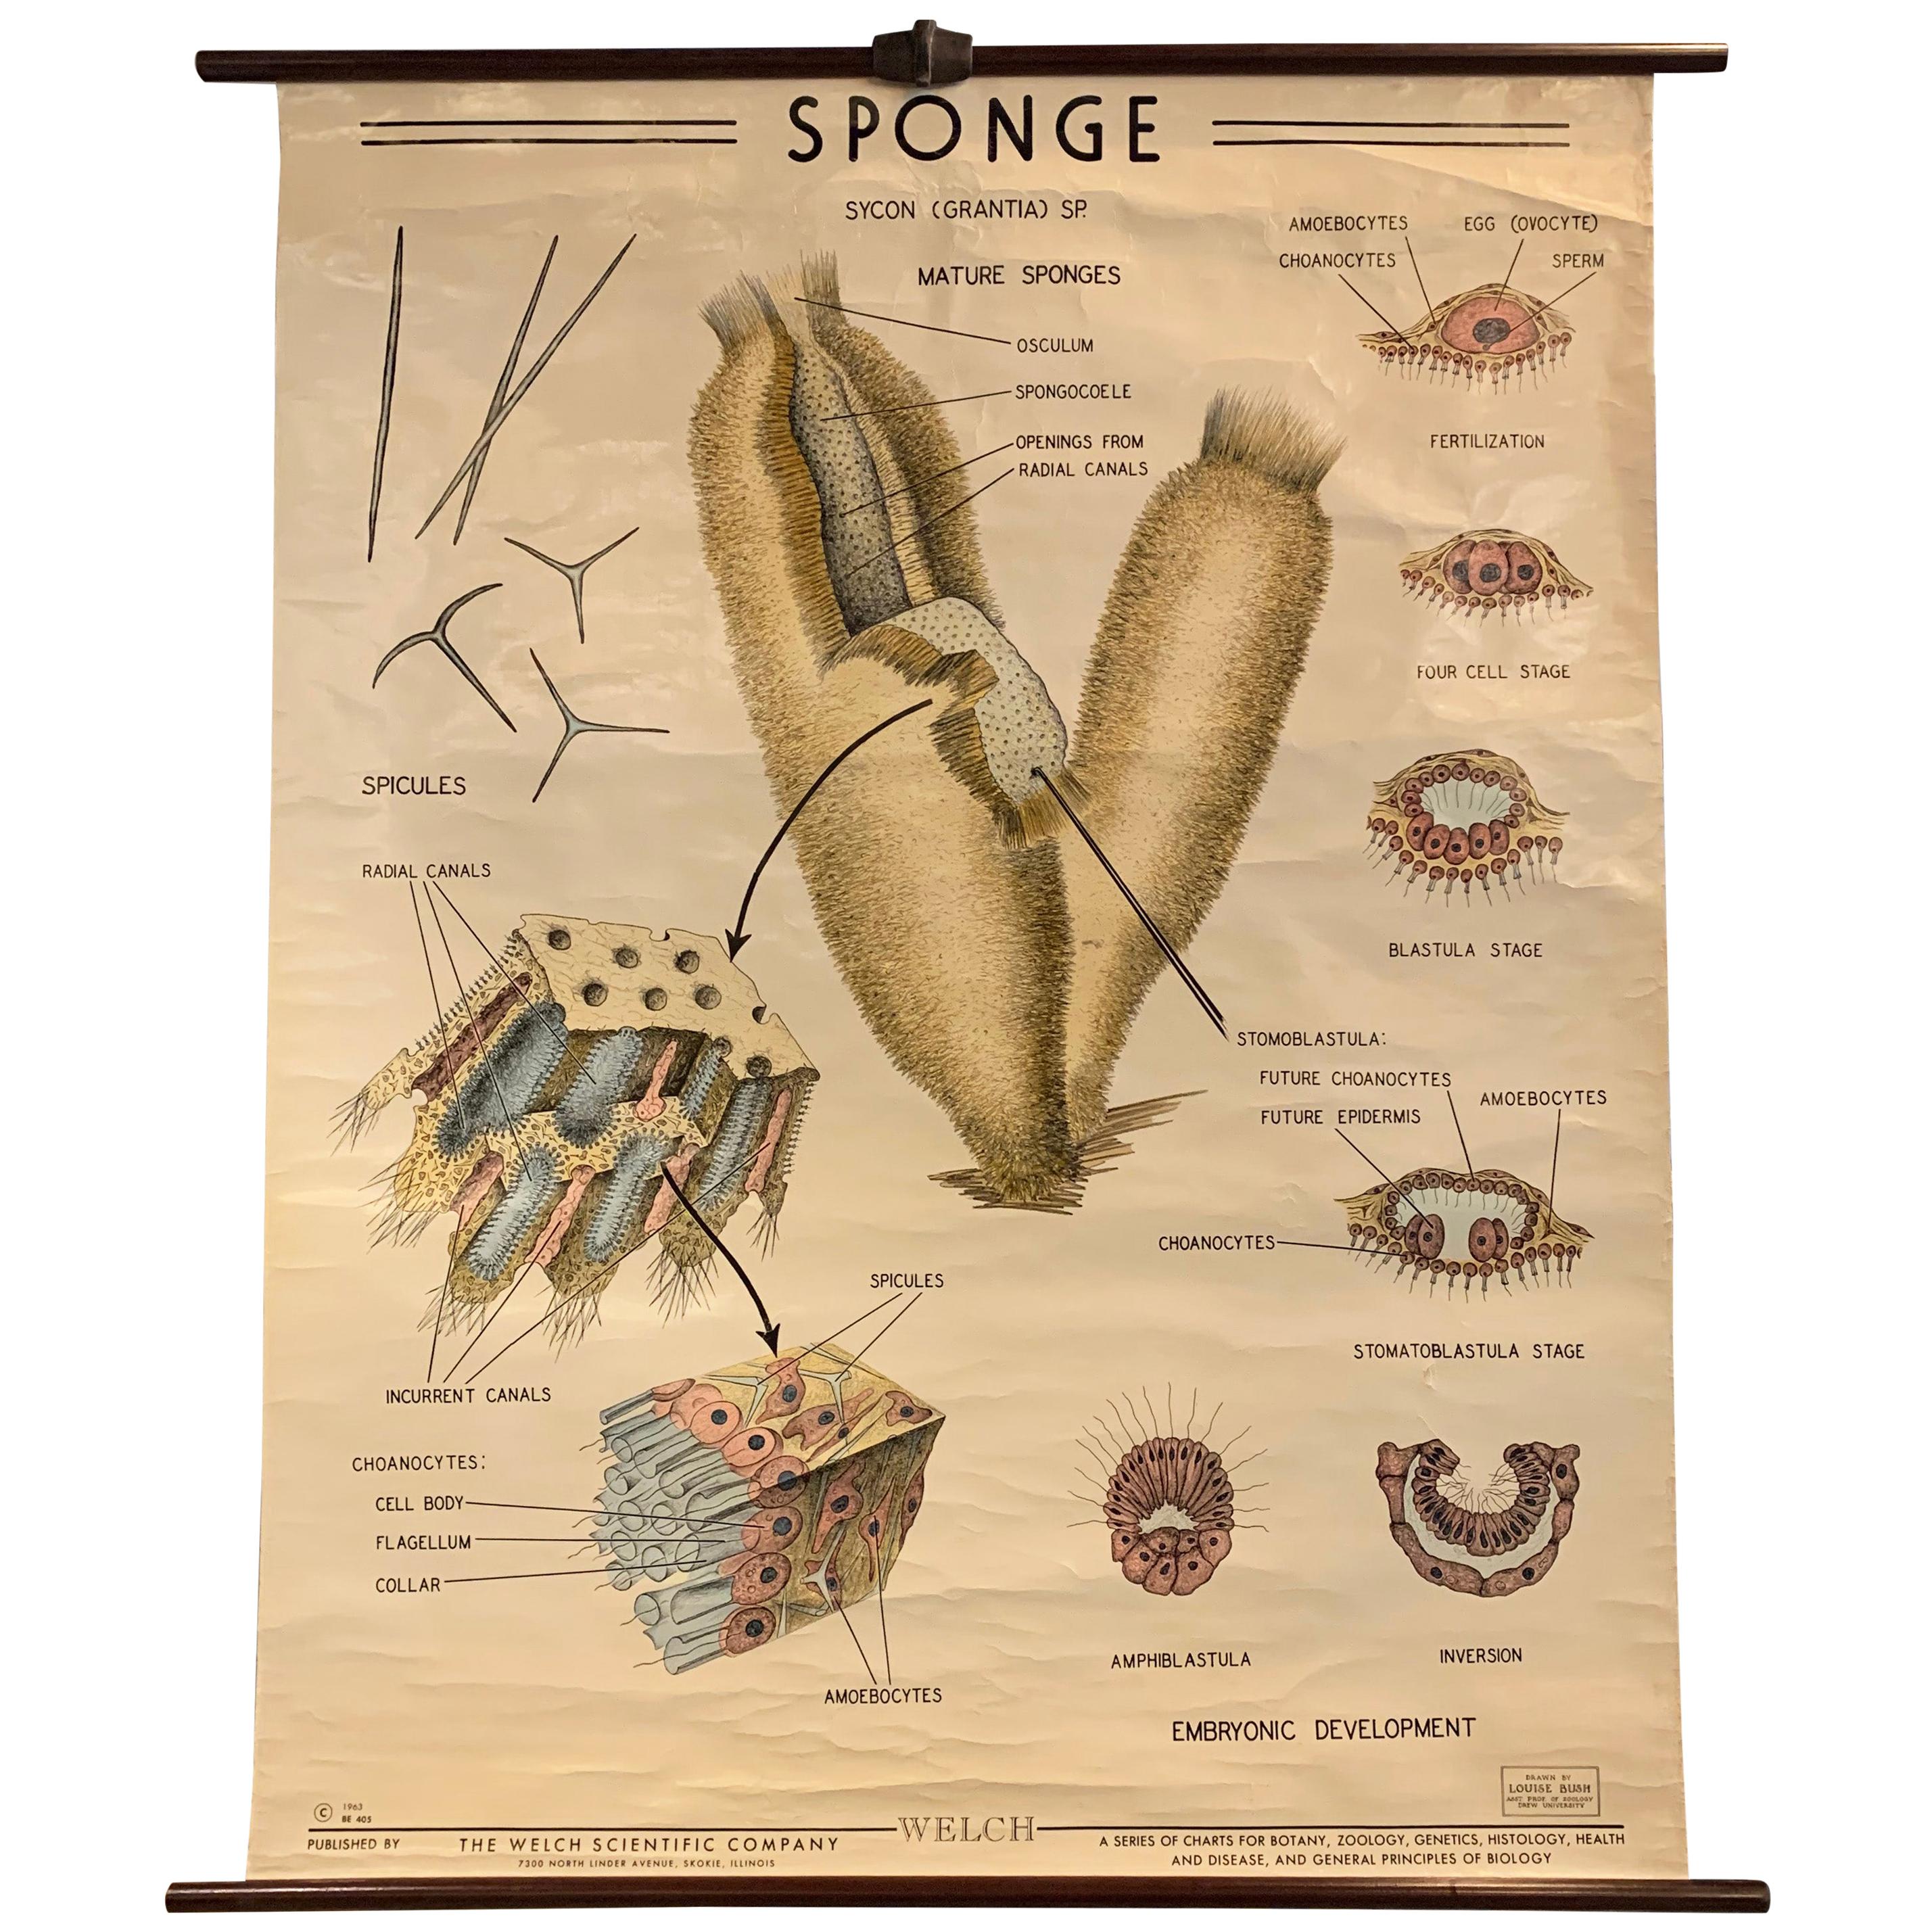 Educational Zoological Marine Sponge Wall Chart, The Welch Scientific Company For Sale